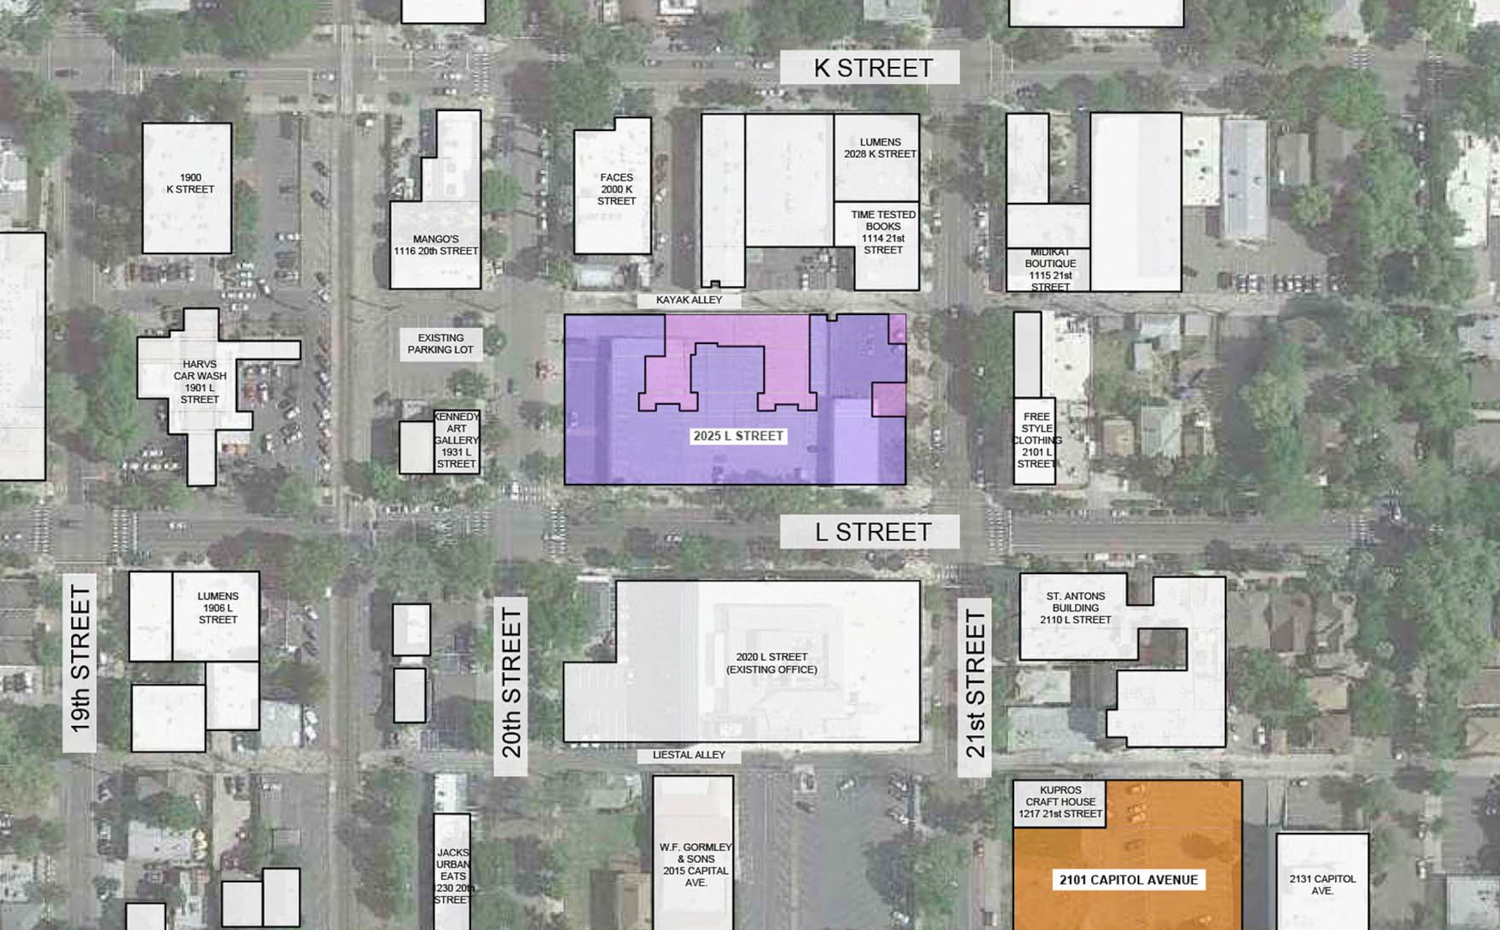 2025 L Street and 2101 Capitol Avenue, map by LPAS Architecture and Design circa 2014